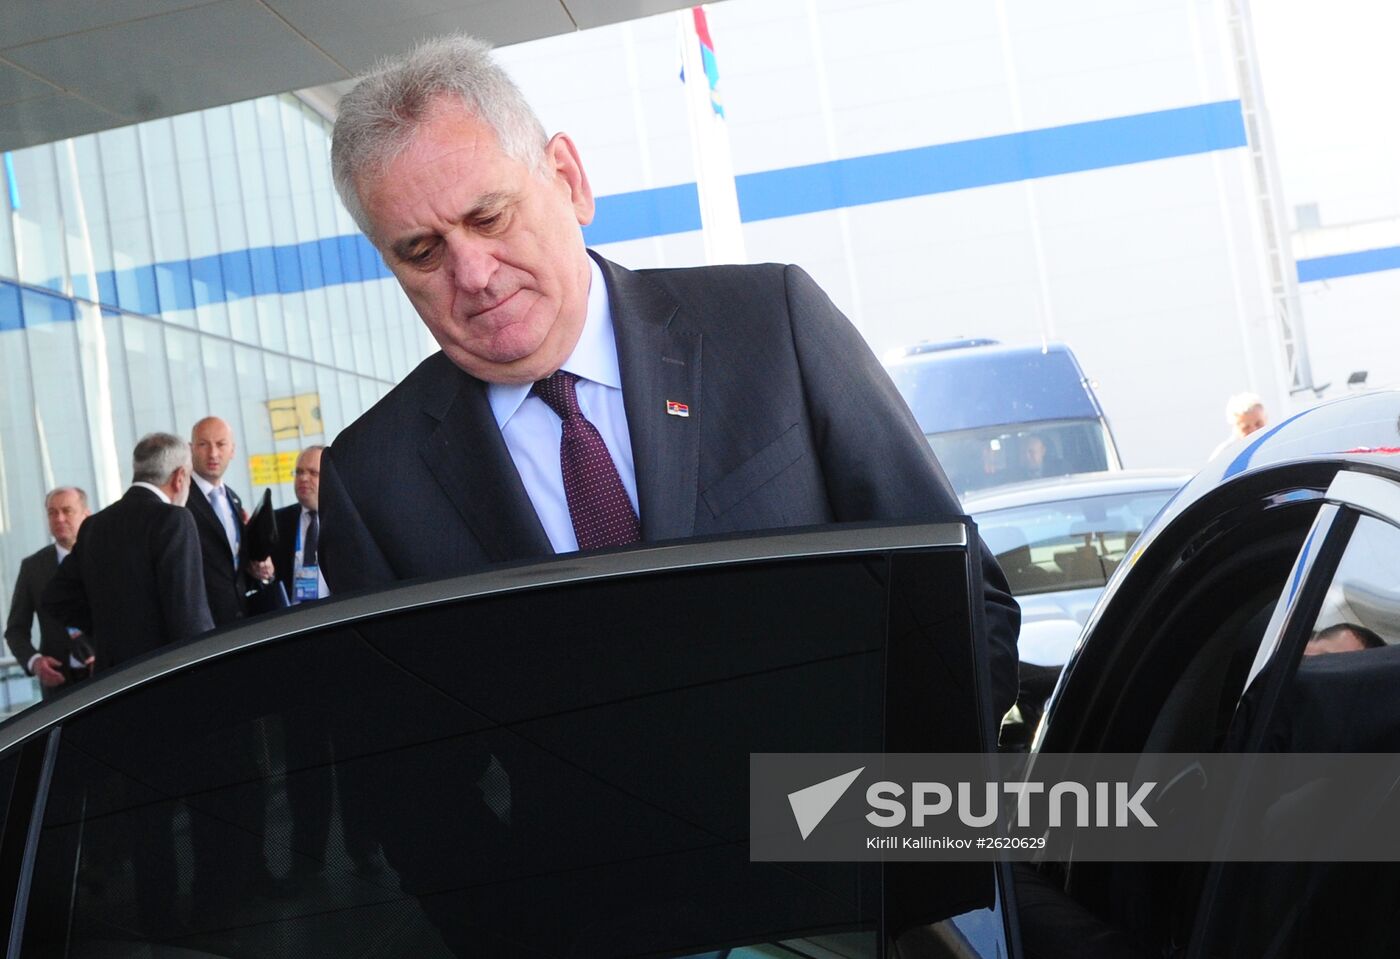 President of Serbia Tomislav Nikolic arrives in Moscow